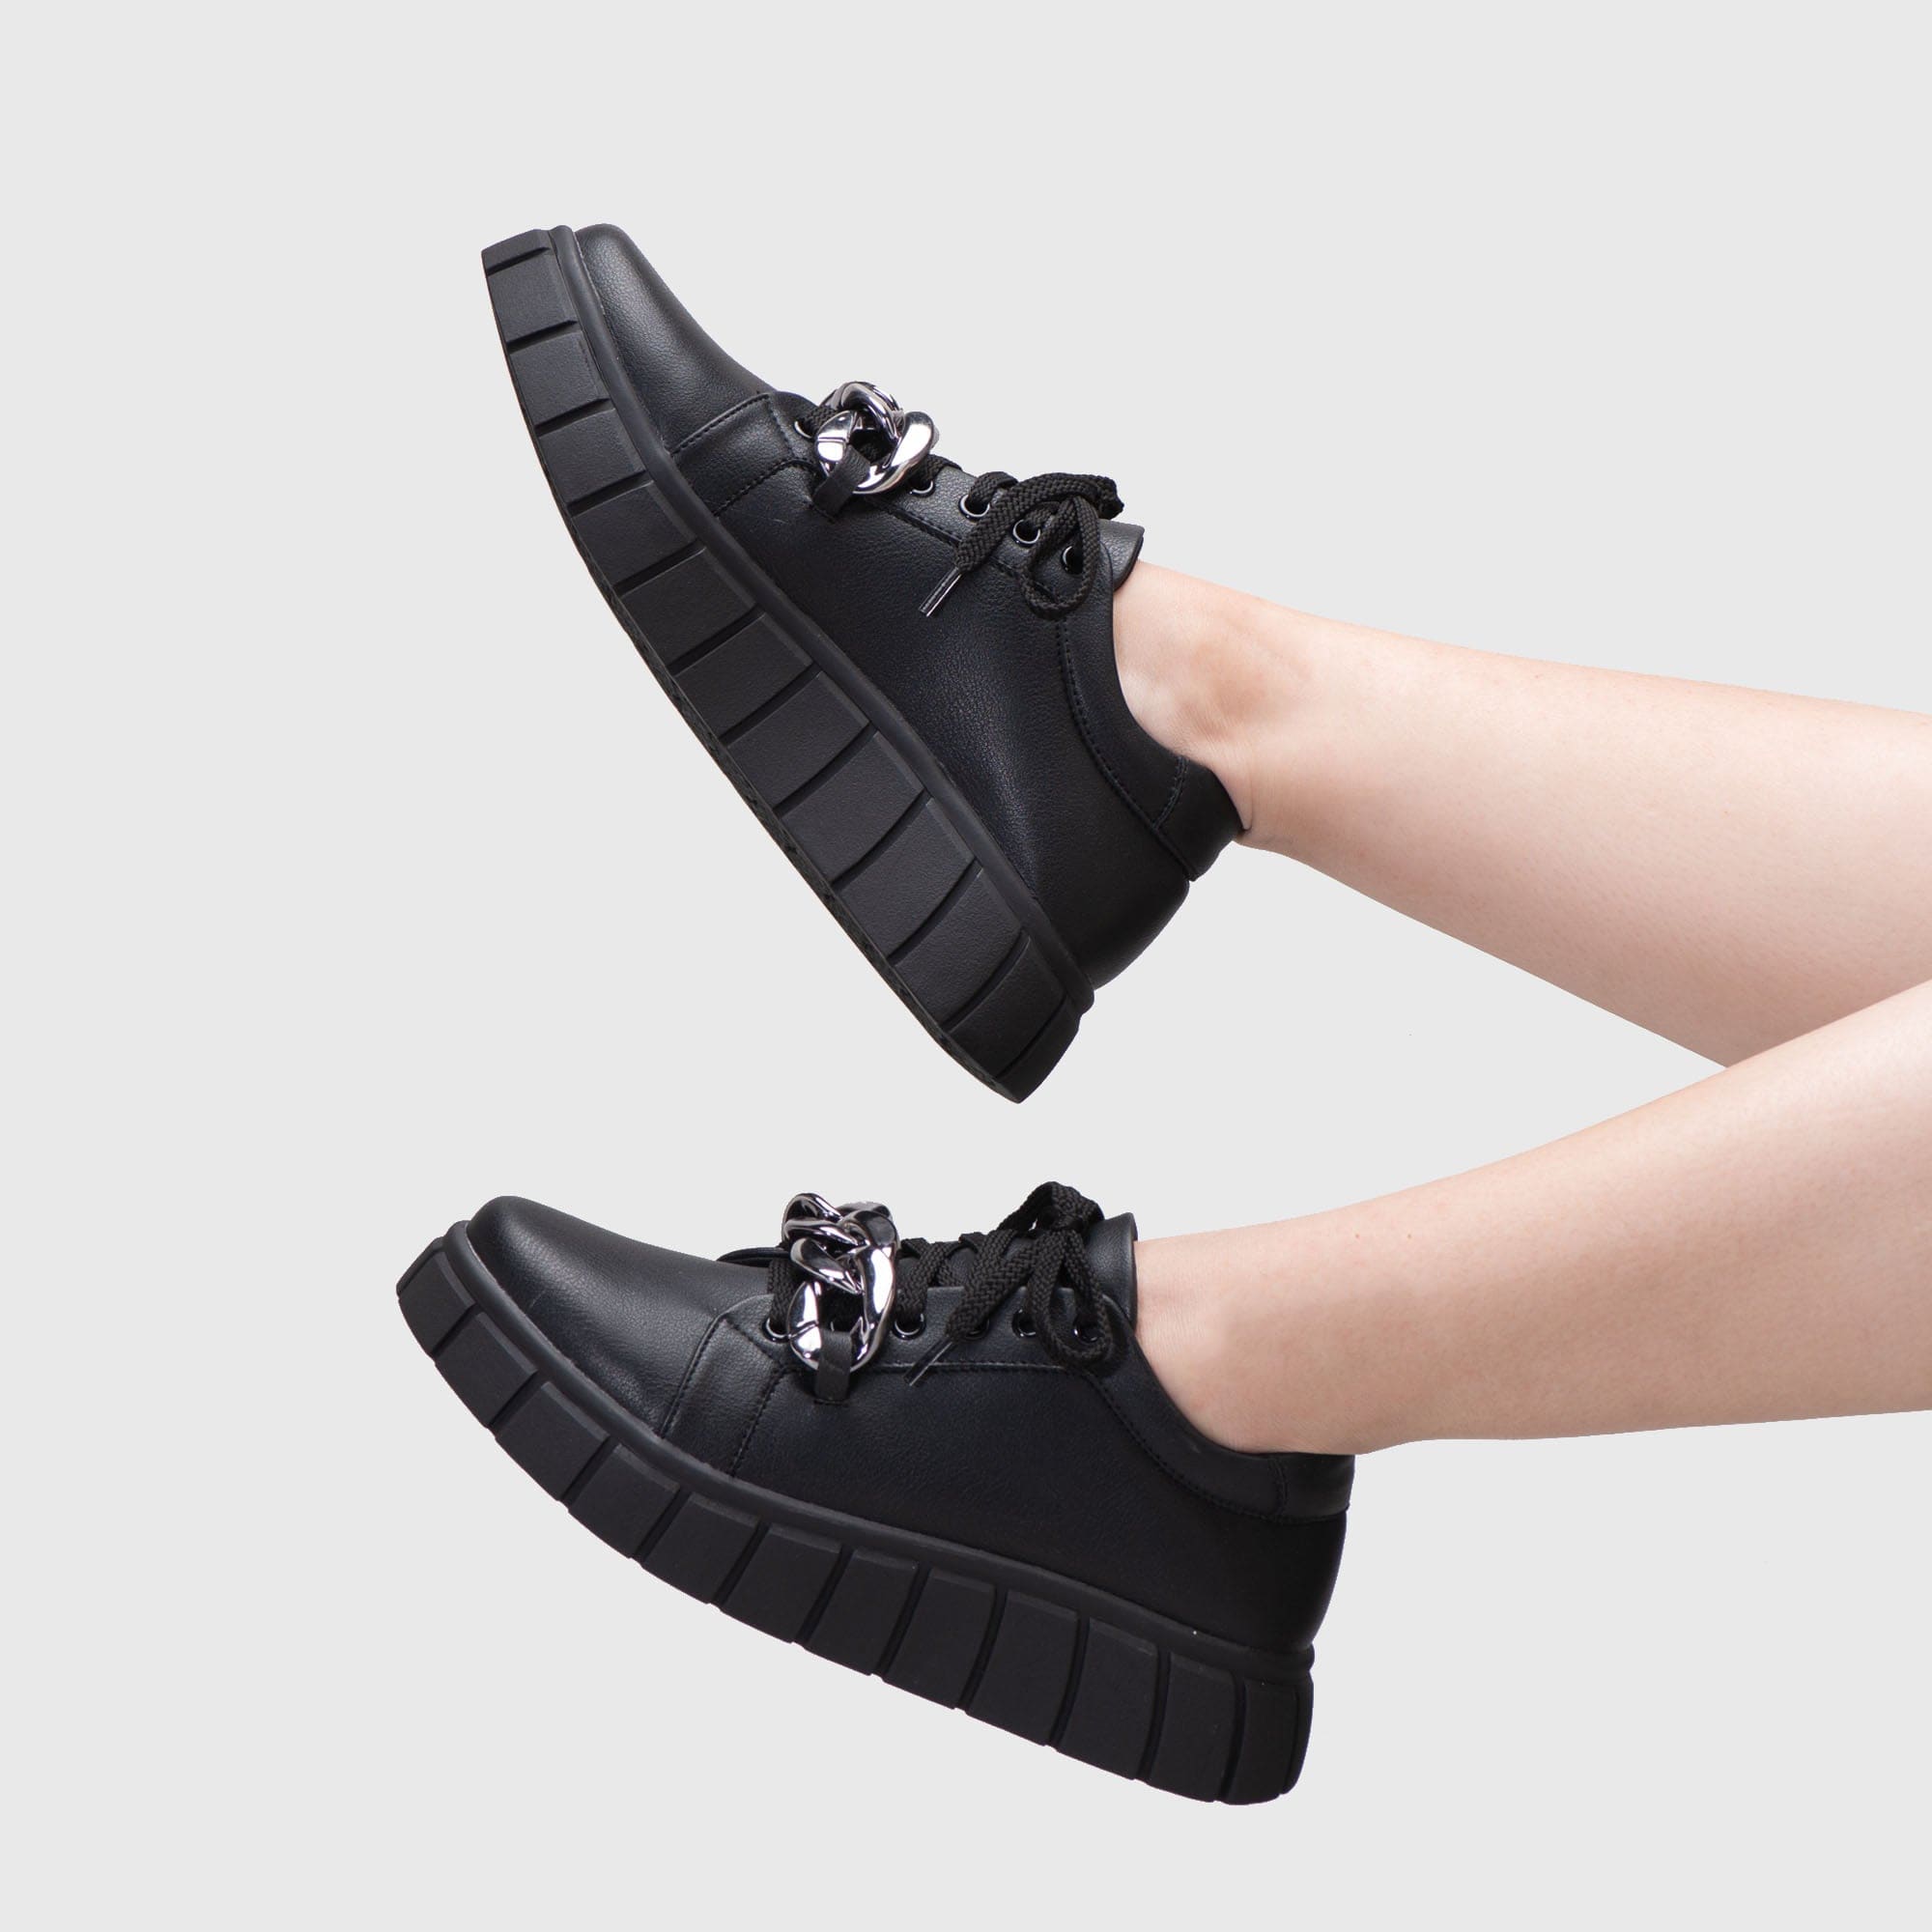 Adorable Projects Official Sneakers Nimri Sneakers Black